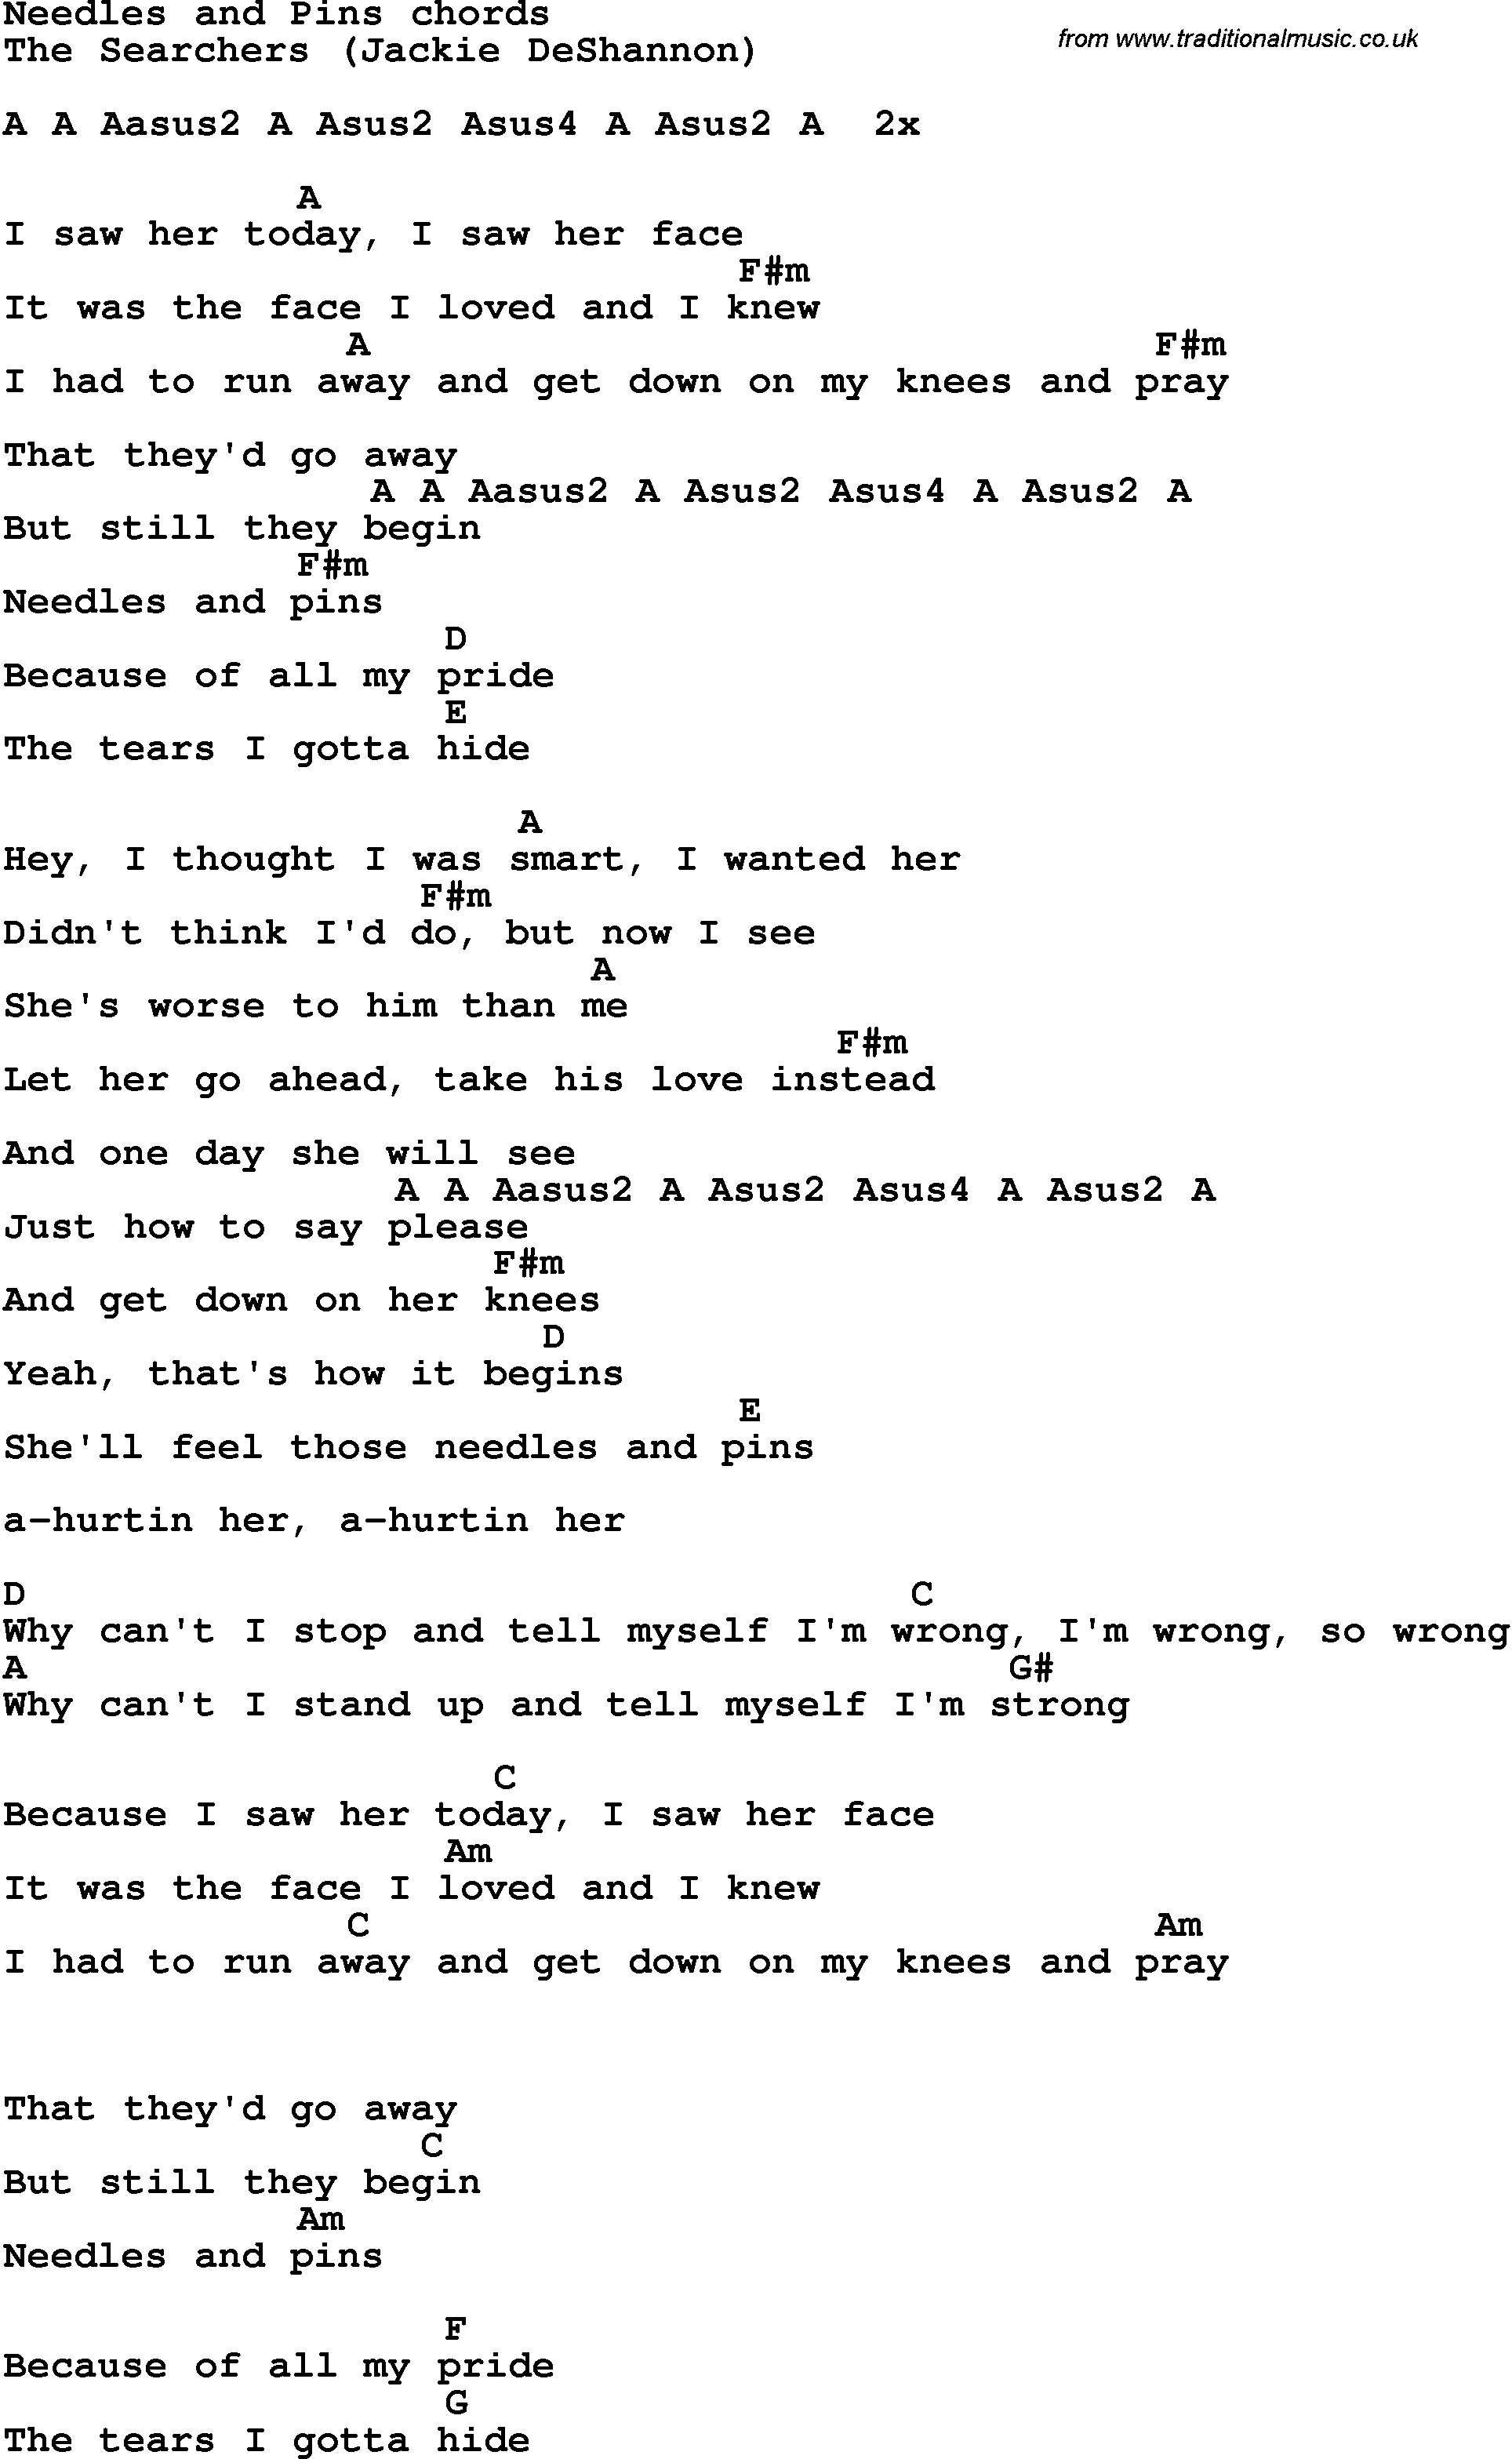 Song Lyrics with guitar chords for Needles And Pins